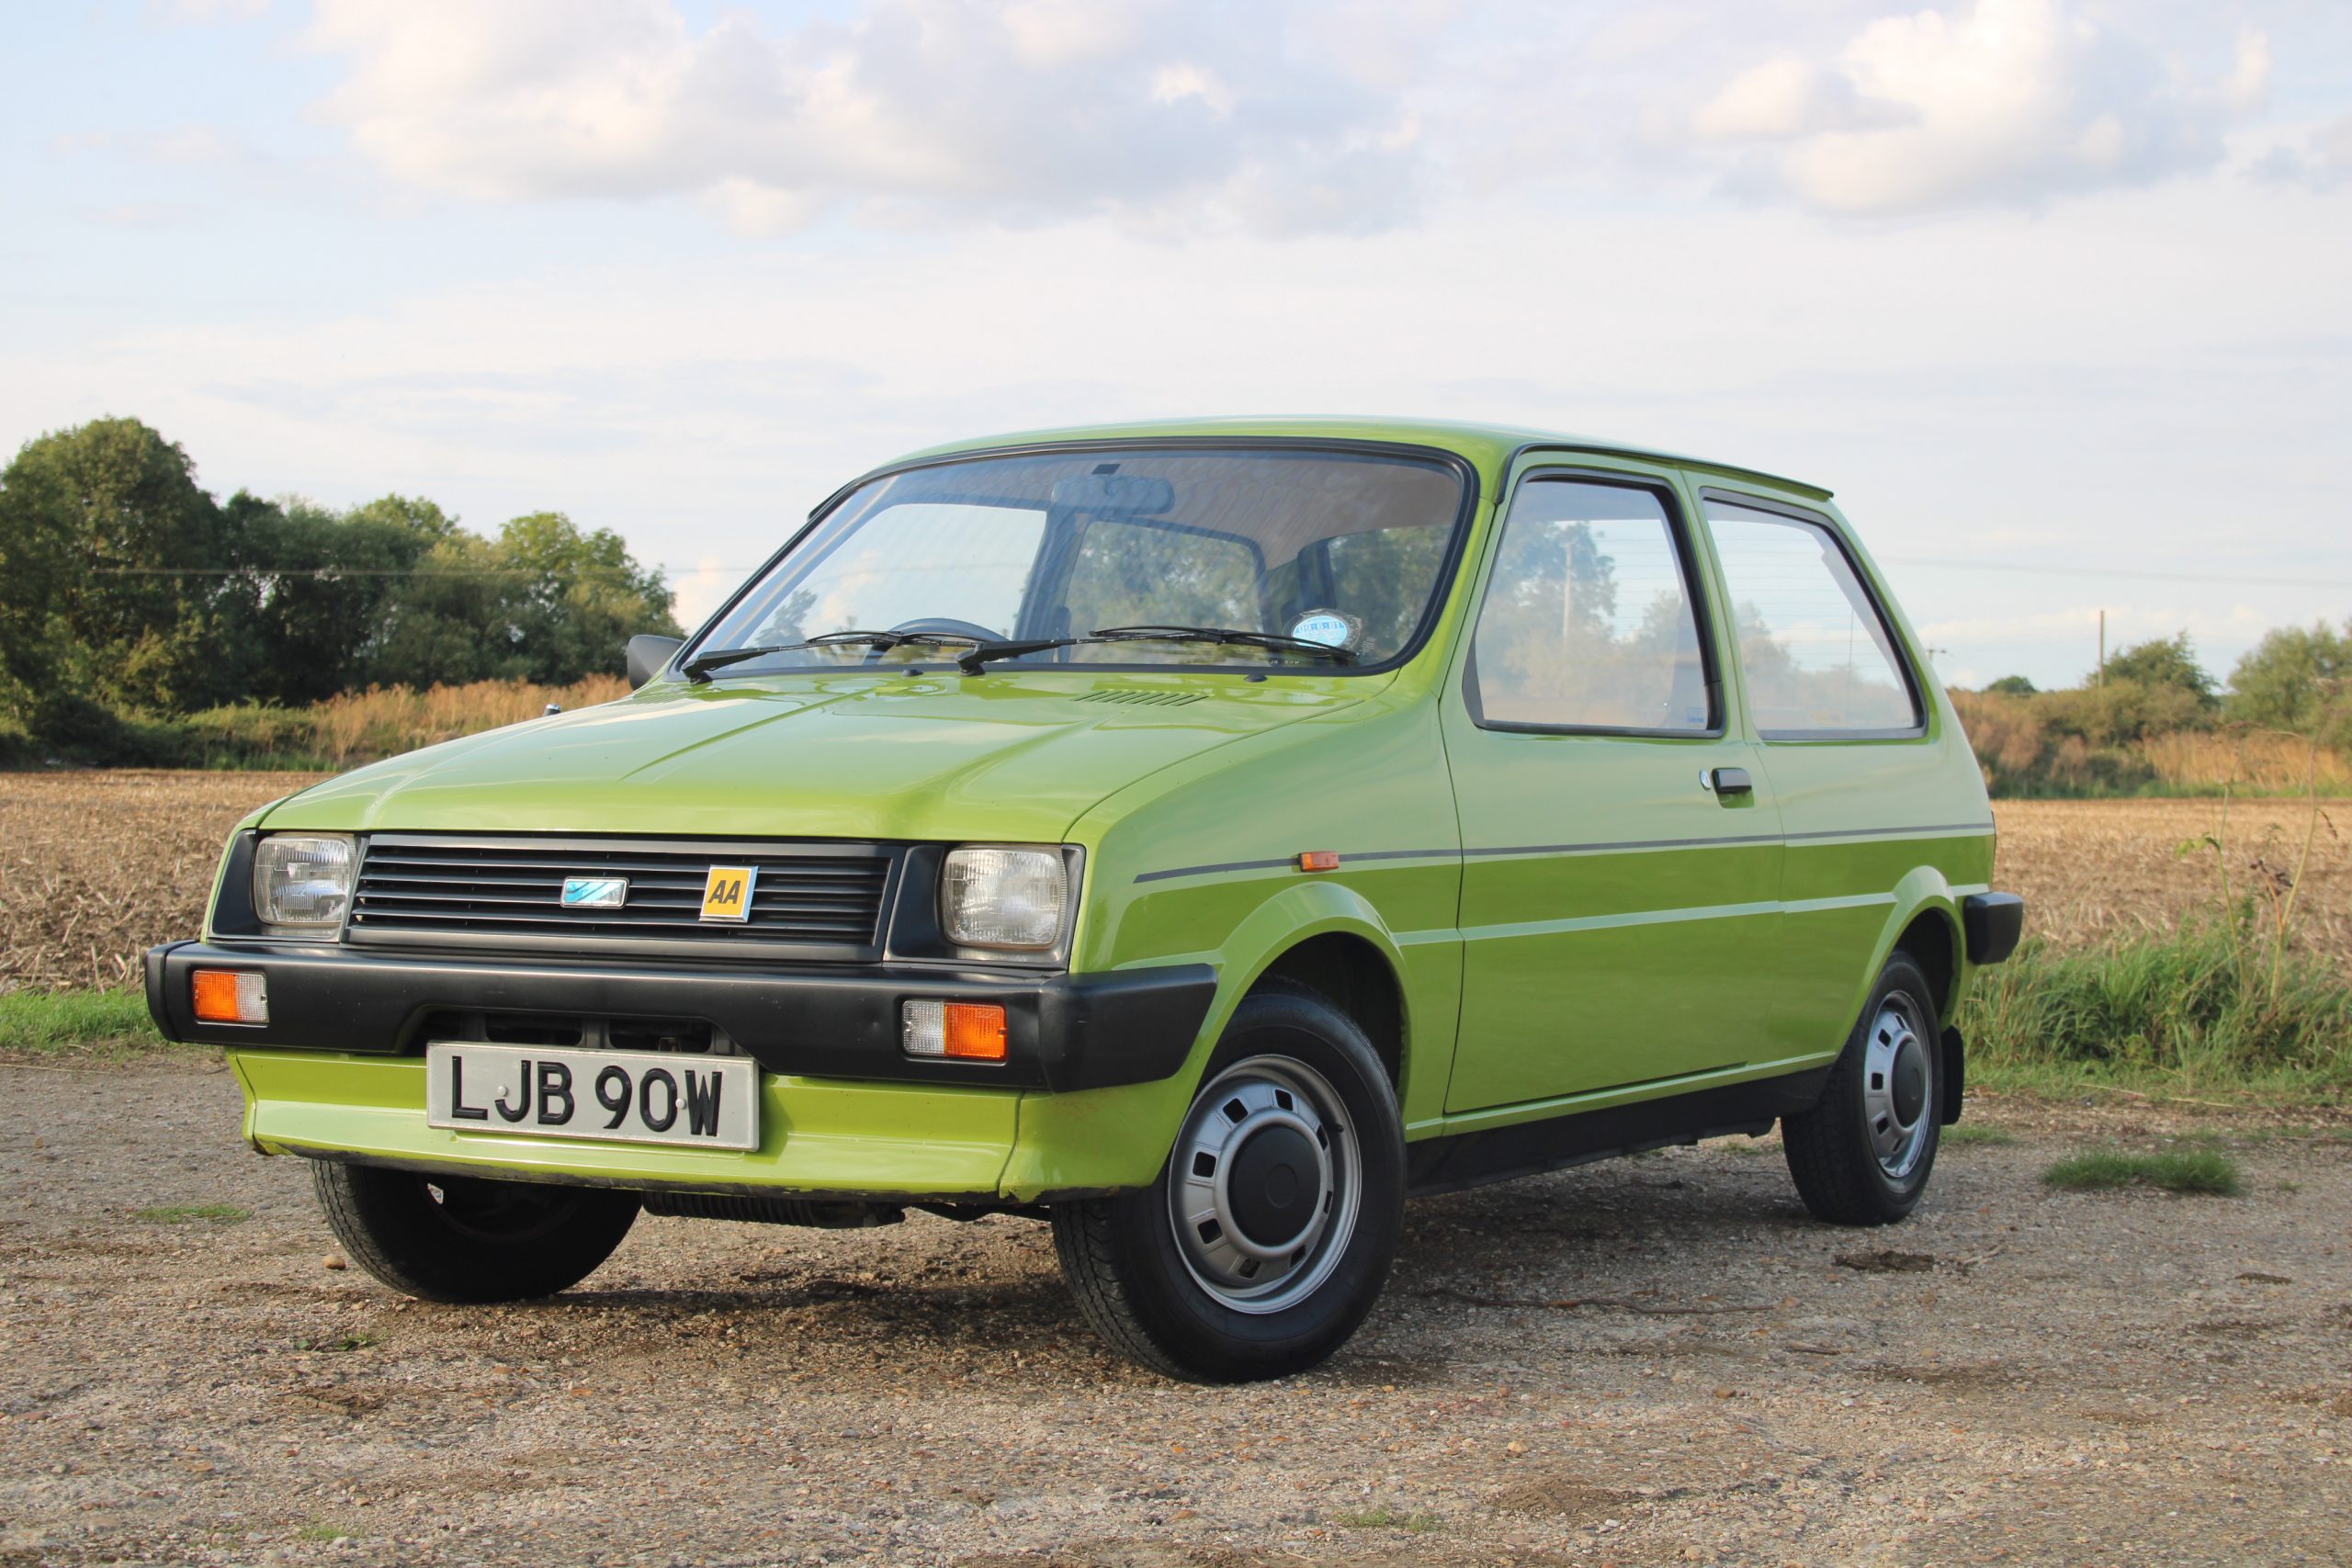 Who was the most famous driver of the Austin Metro?